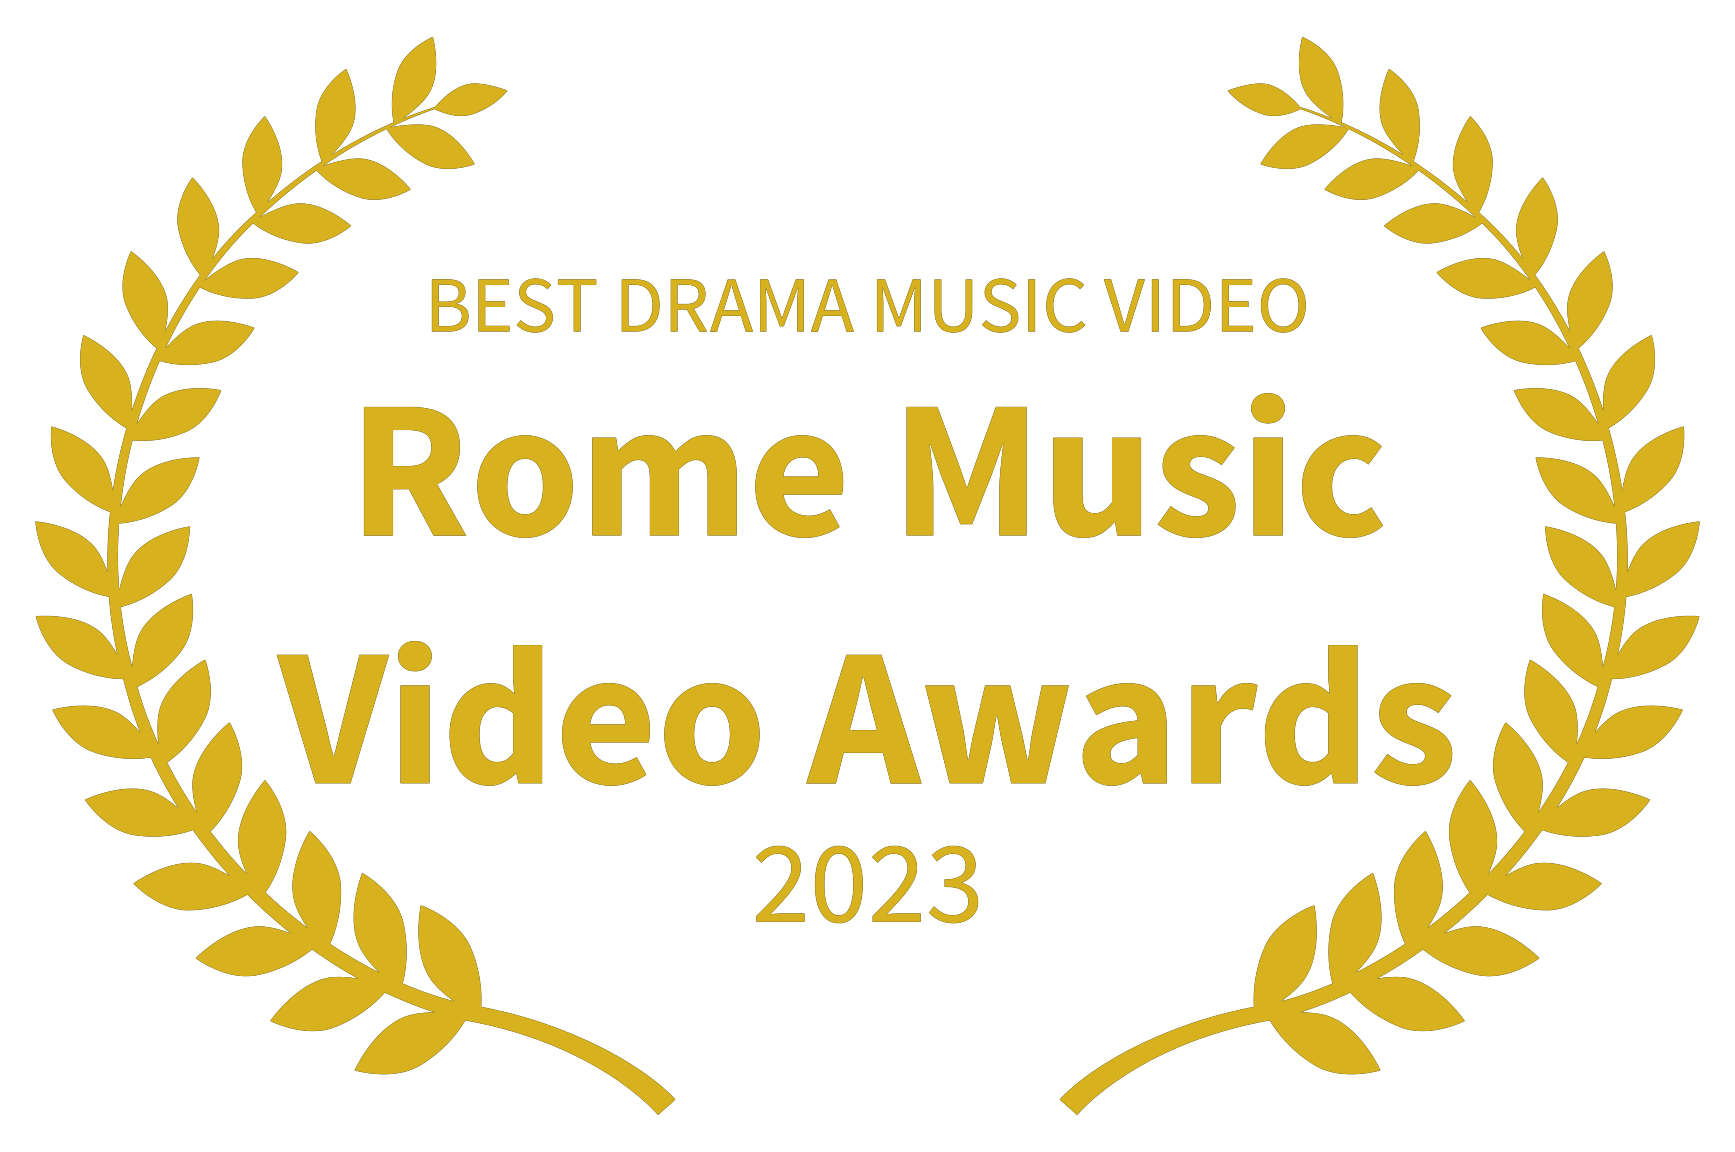 BEST DRAMA MUSIC VIDEO - Rome Music Video Awards gold - 2023.png